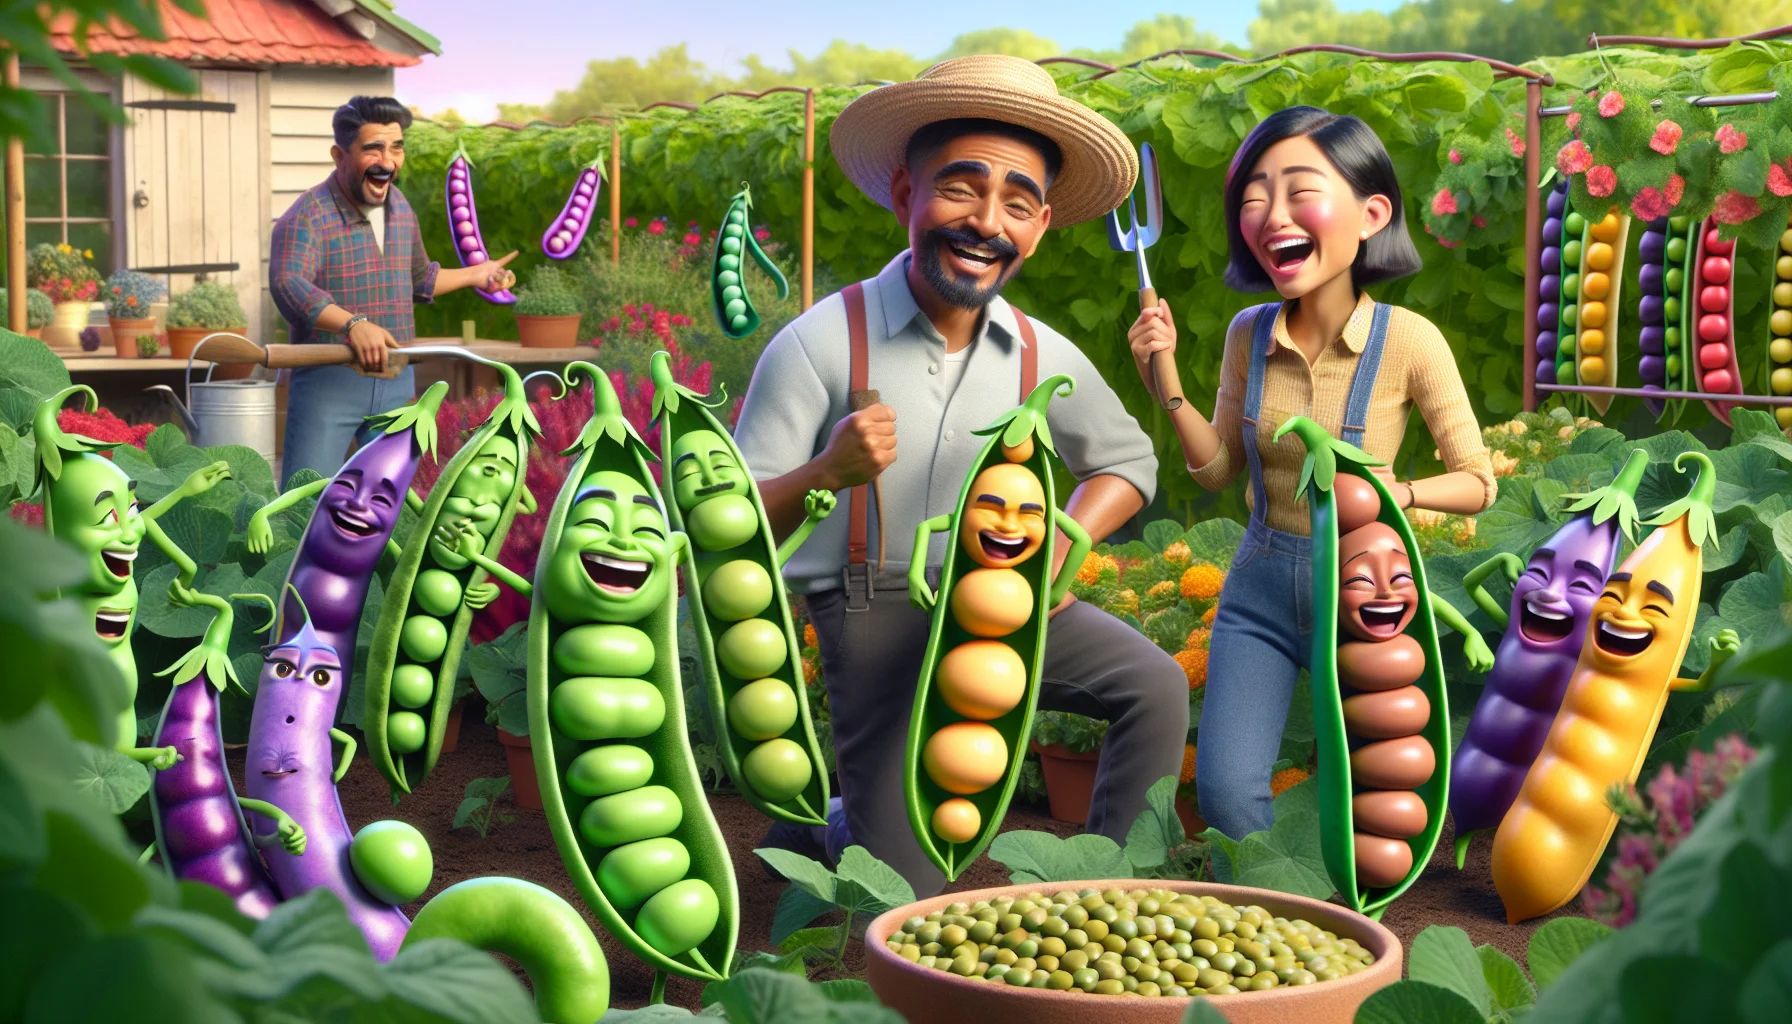 Create an amusing and realistic scene showcasing various types of pod fruits including vibrant green peas, luscious purple beans, golden yellow lentils and more. They are animated with joyful expressions, dancing around in a luscious vegetable garden. In the midst of the ruckus, a male Hispanic gardener, bemused, watches on, holding a trowel and wearing a sun hat, and a female Asian gardener laughing heartily, holding a watering can. This lively spectacle provokes an inviting and enticing atmosphere for gardening.